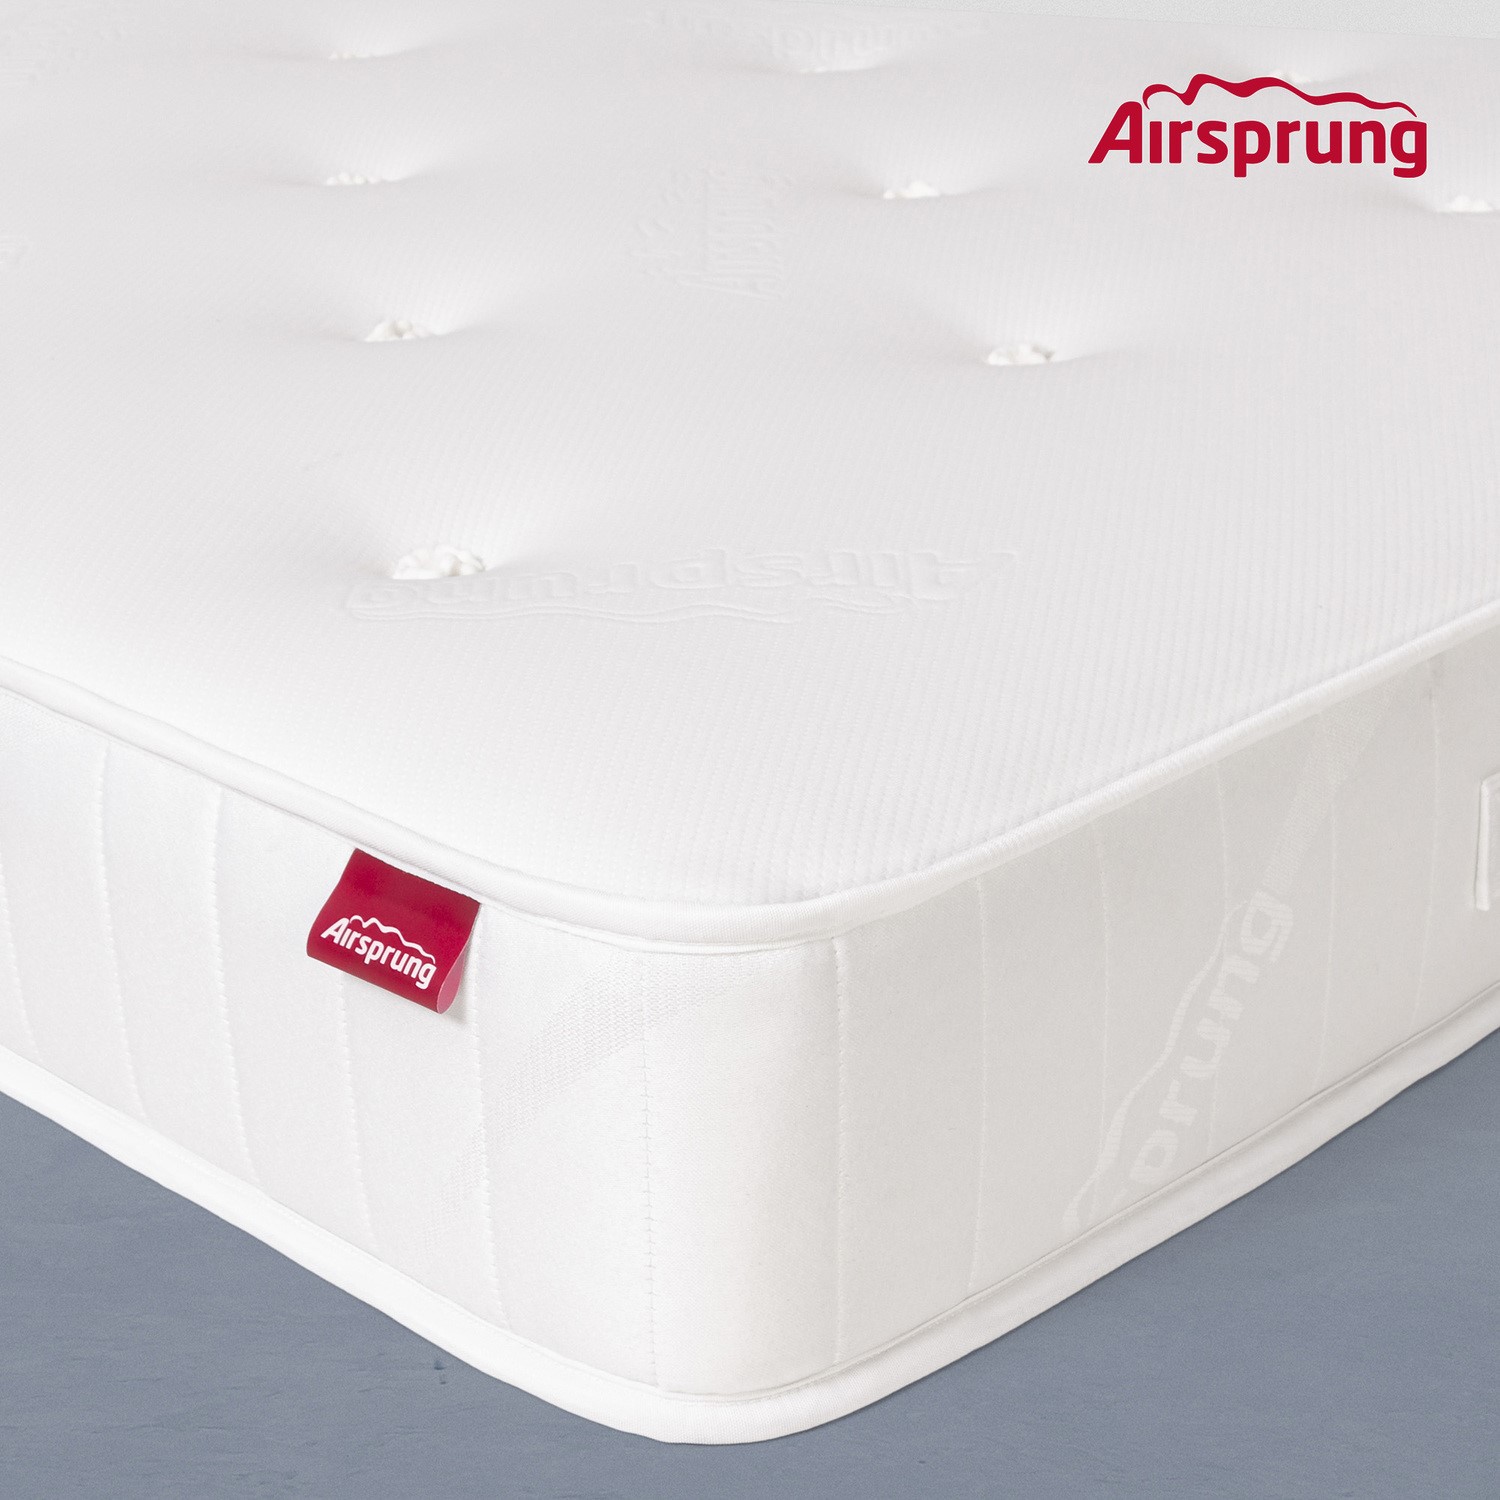 Airsprung ultra firm rolled coil spring mattress - king size